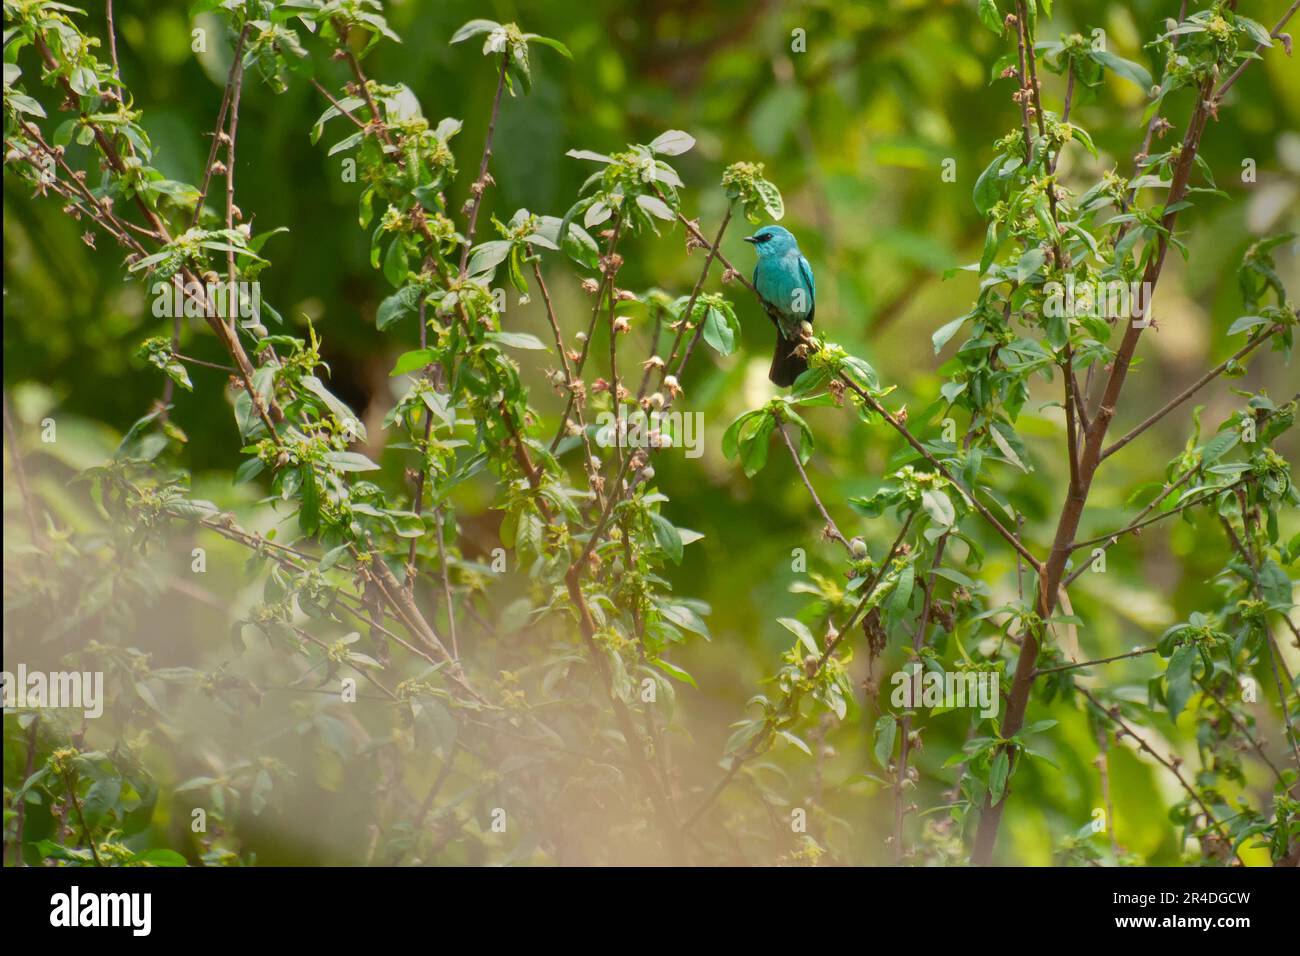 Verditer flycatcher bird, Eumyias thalassinus, Old World flycatcher, in the Himalayas with shade of copper-sulphate blue and dark patch between eyes. Stock Photo